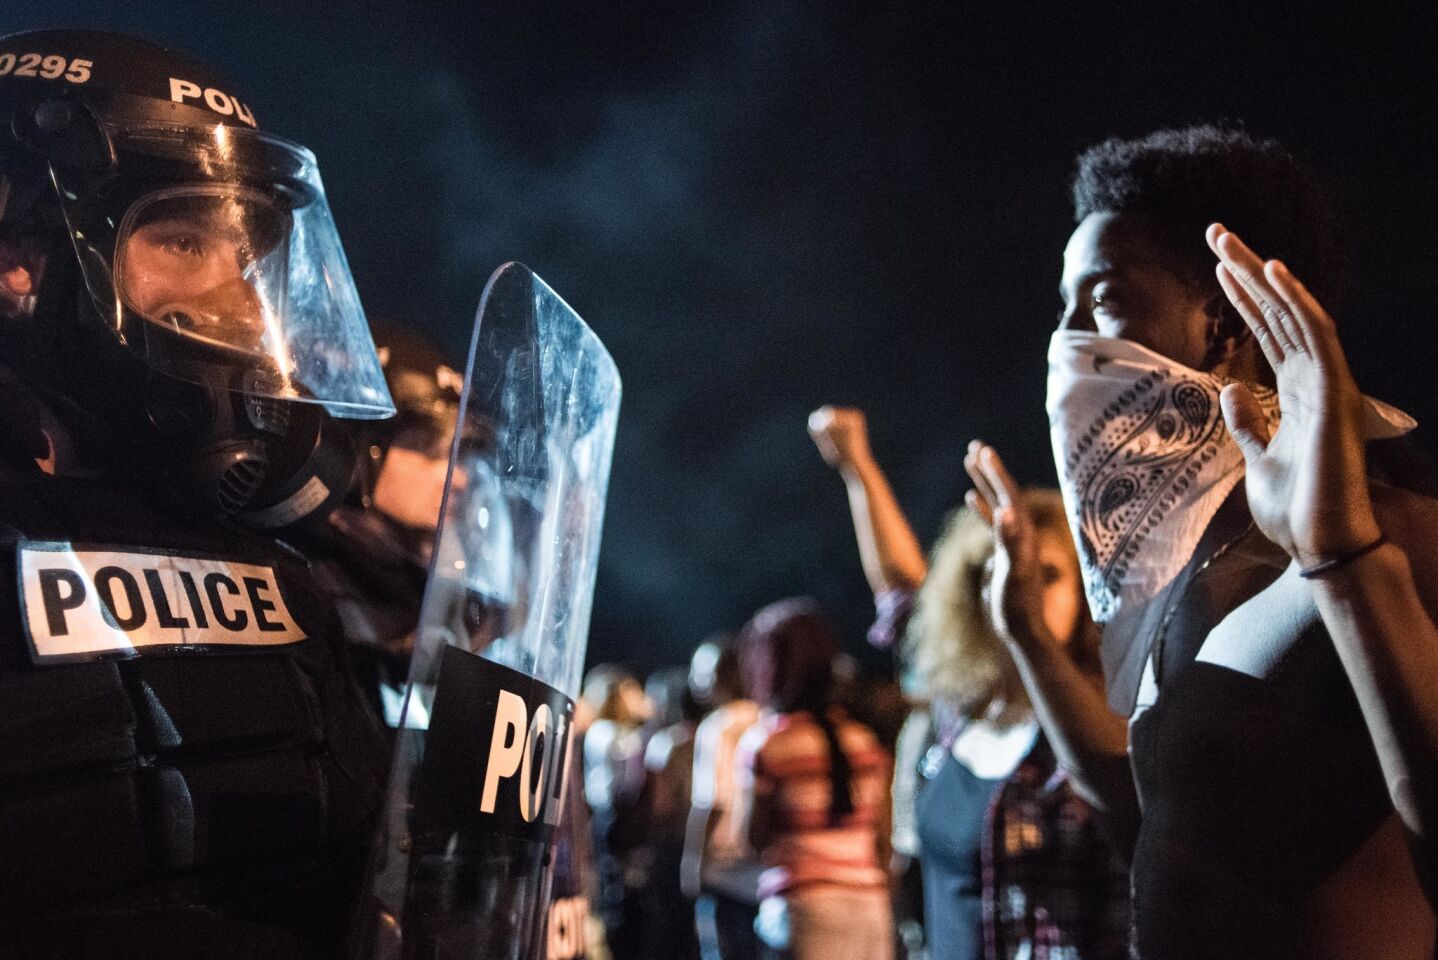 Police face off with protestors on Interstate 85 in Charlotte, N.C., during demonstrations after a man was shot to death by police.